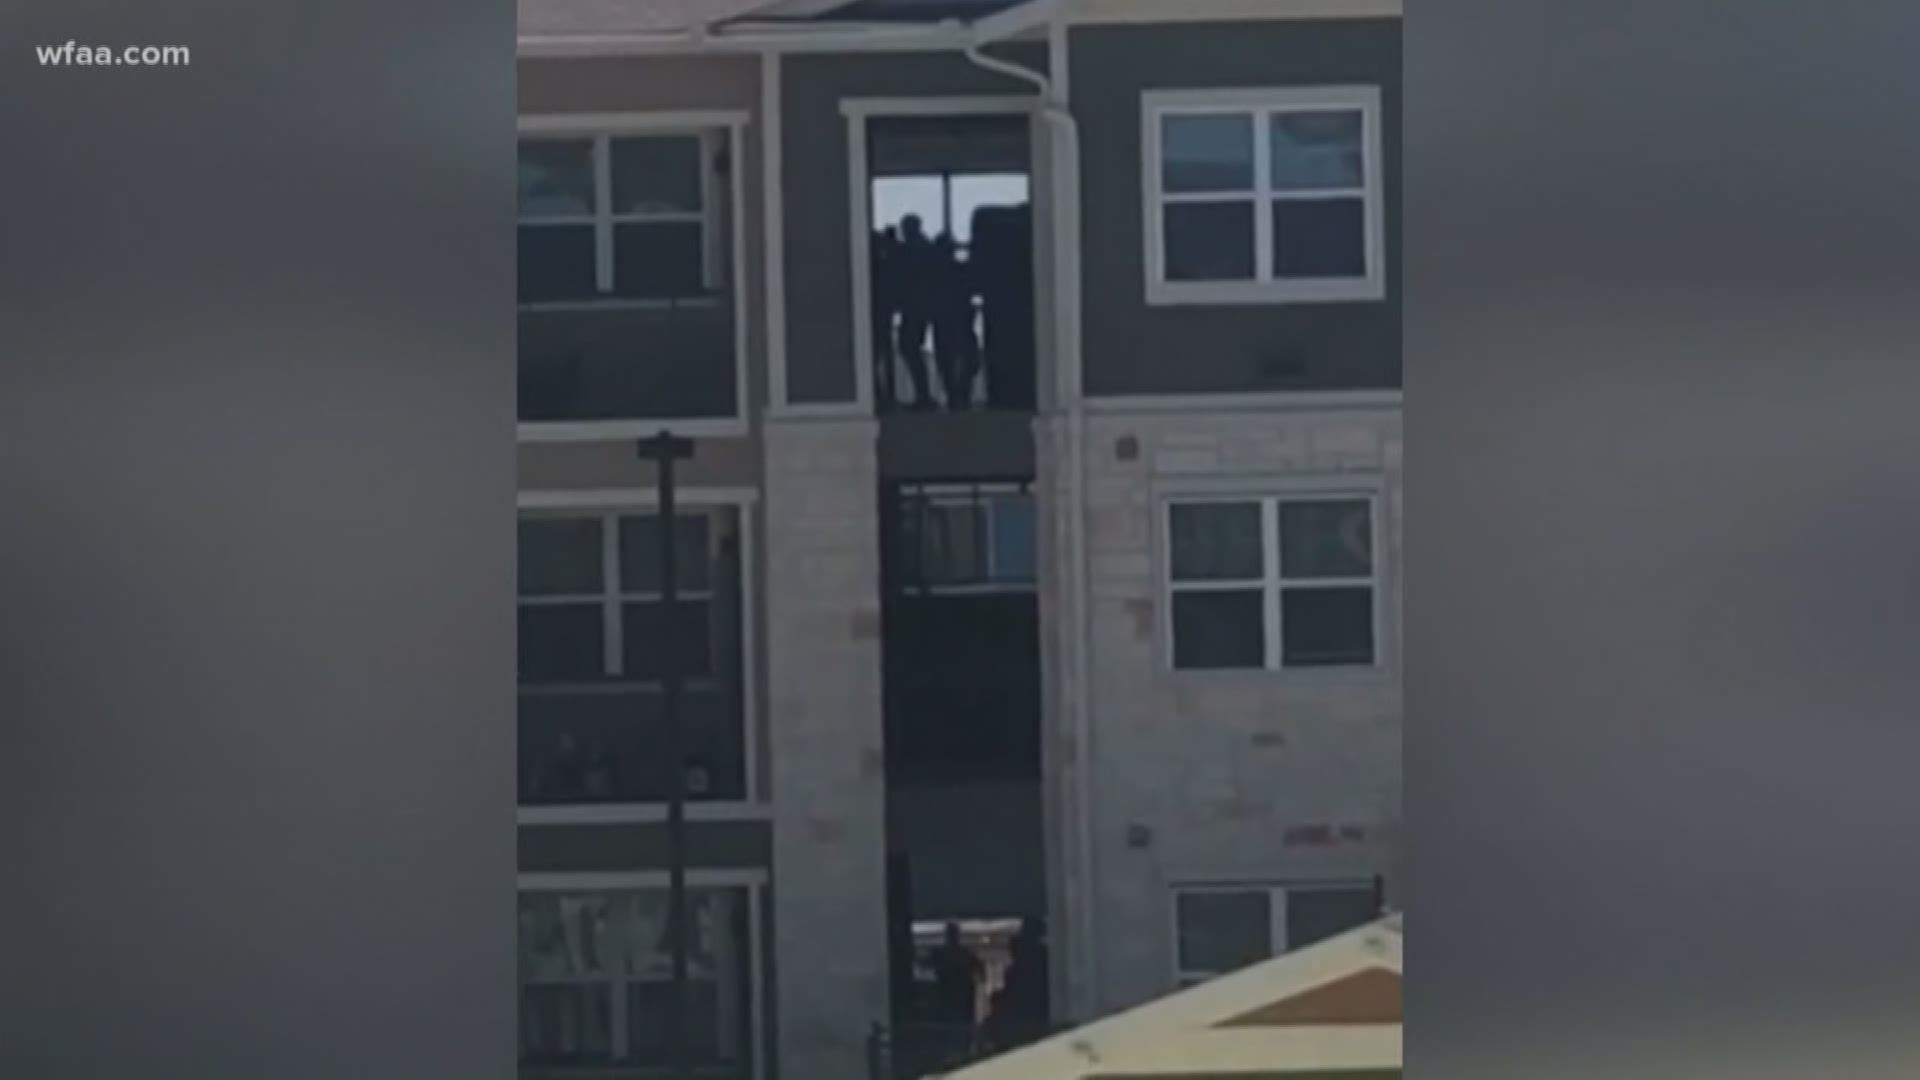 The situation ended when the SWAT team entered apartment and shot at suspect, Fort Worth police said during a news conference.